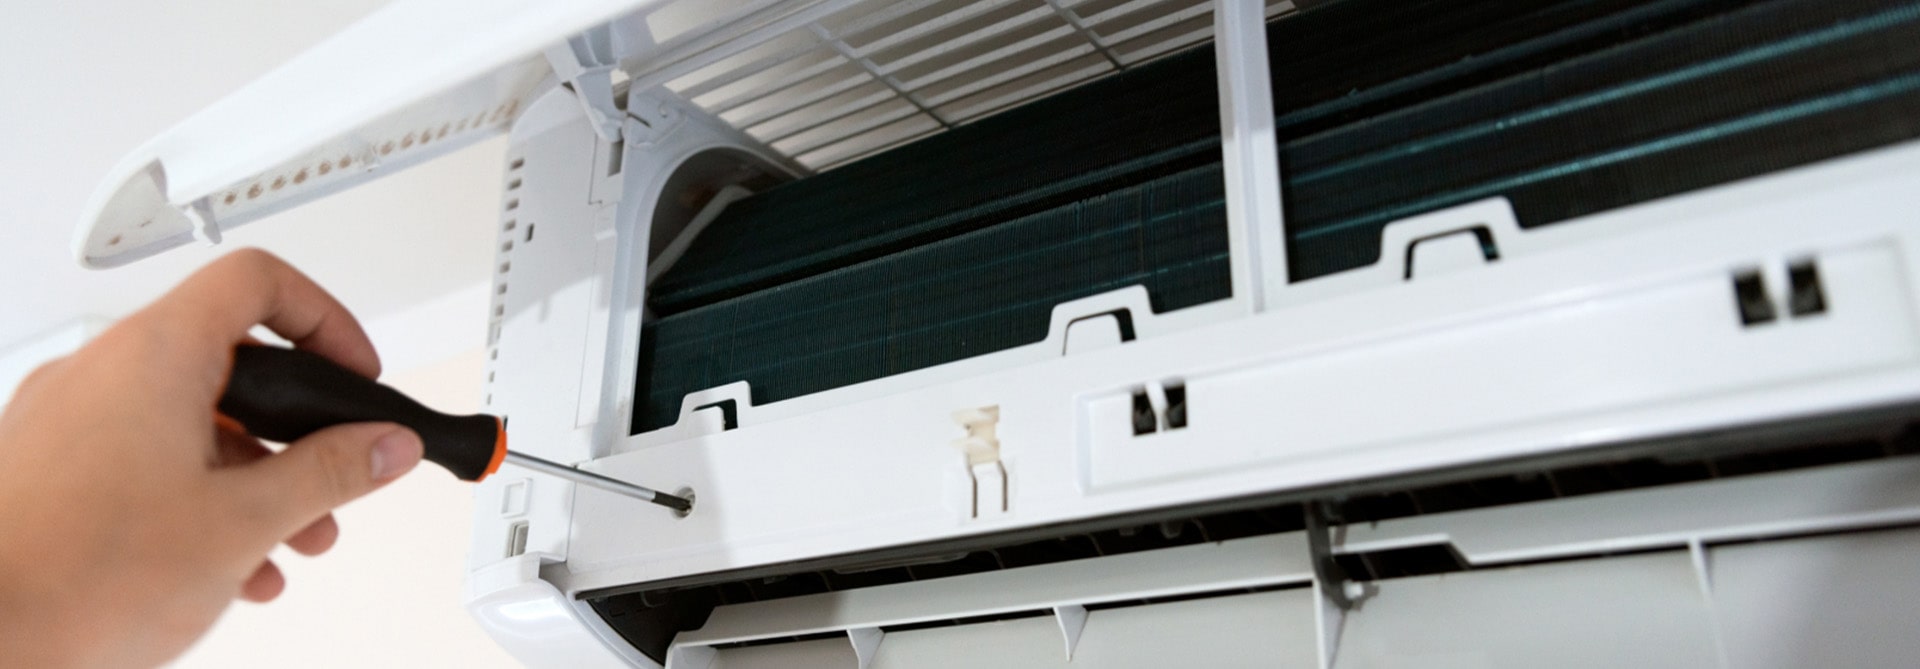 How Often Should Your Aircon Be Serviced In Singapore